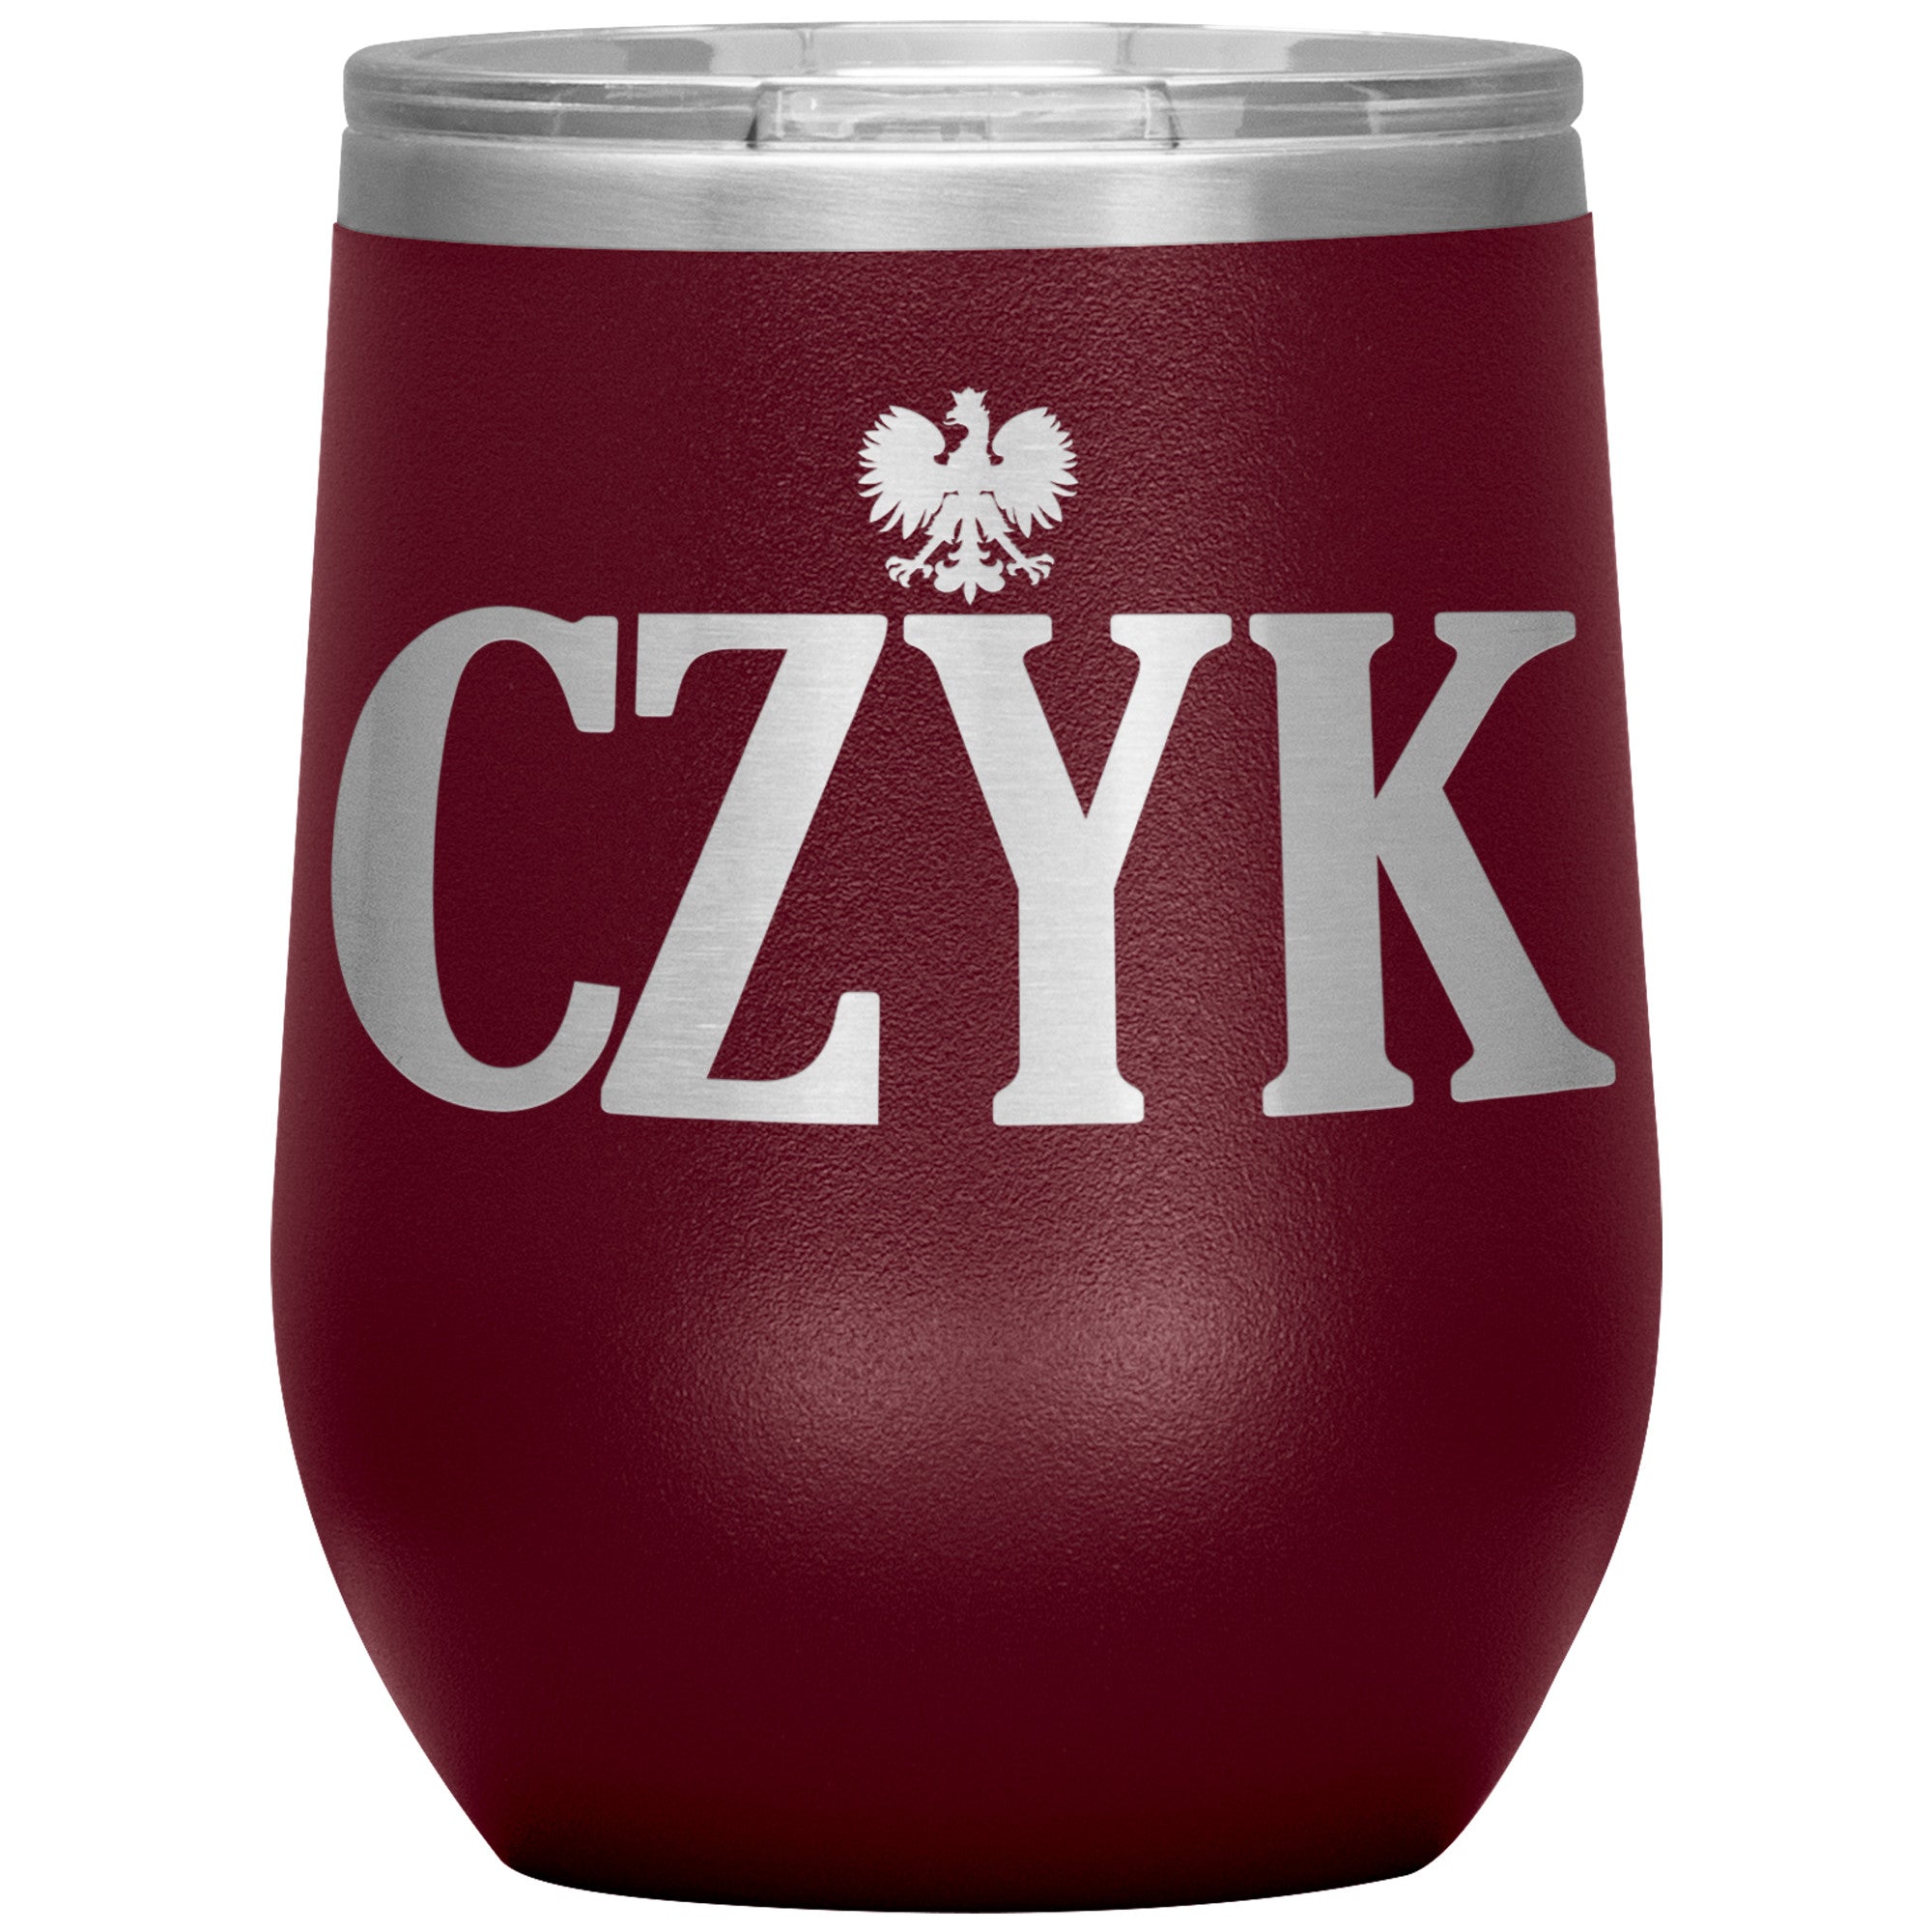 Polish Surnames Ending In CZYK Insulated Wine Tumbler Tumblers teelaunch Maroon  